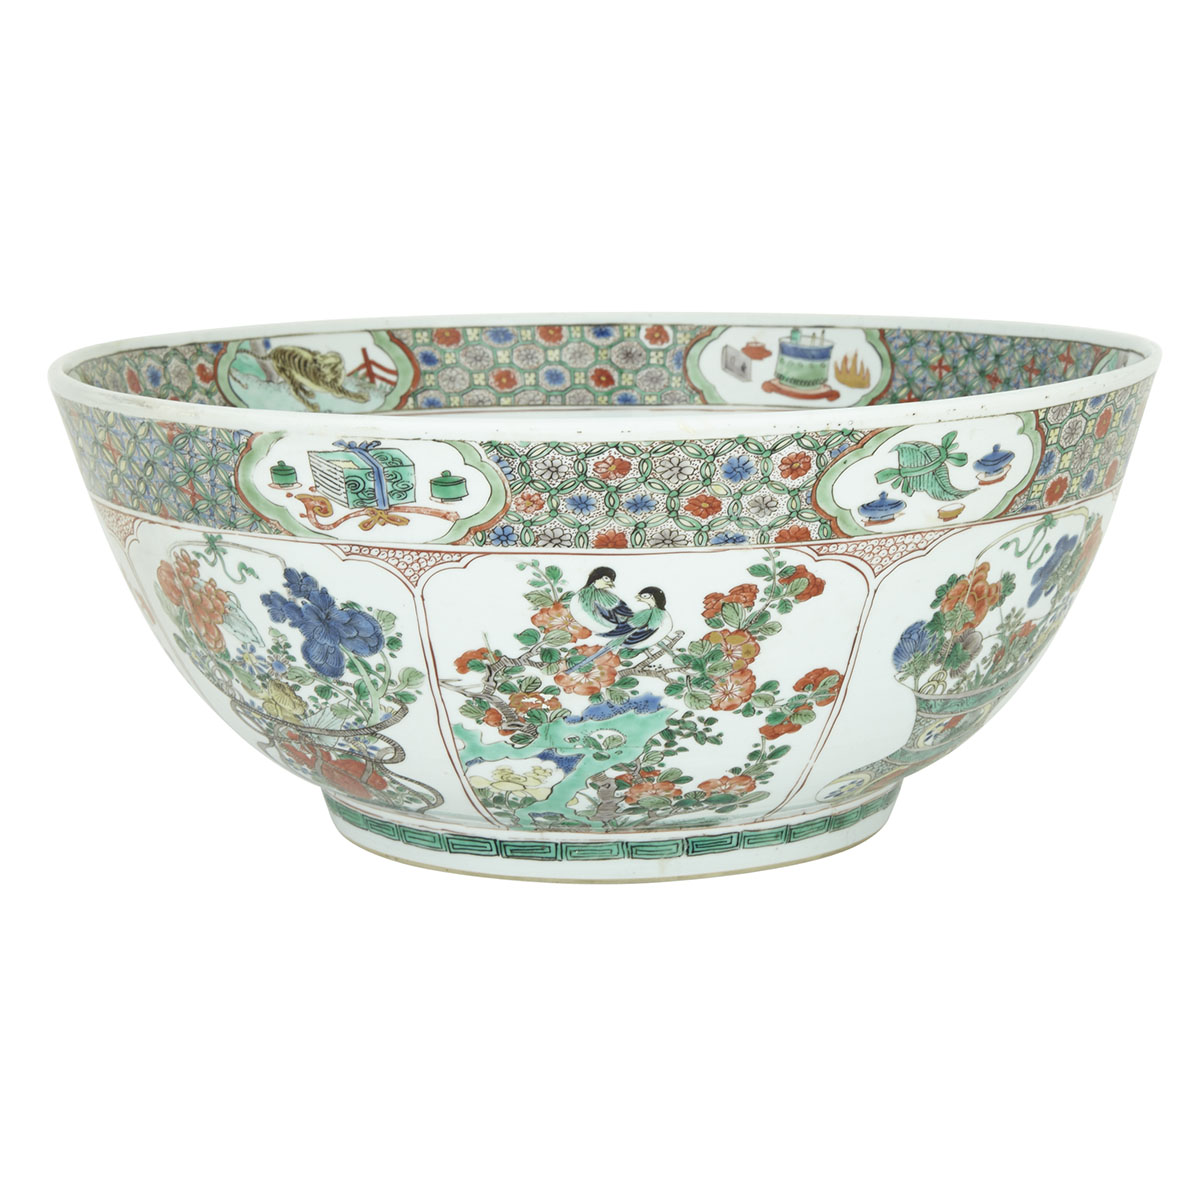 A Massive Famille-Verte Wucai Punch Bowl, Mark and Period of Kangxi (1662-1772)